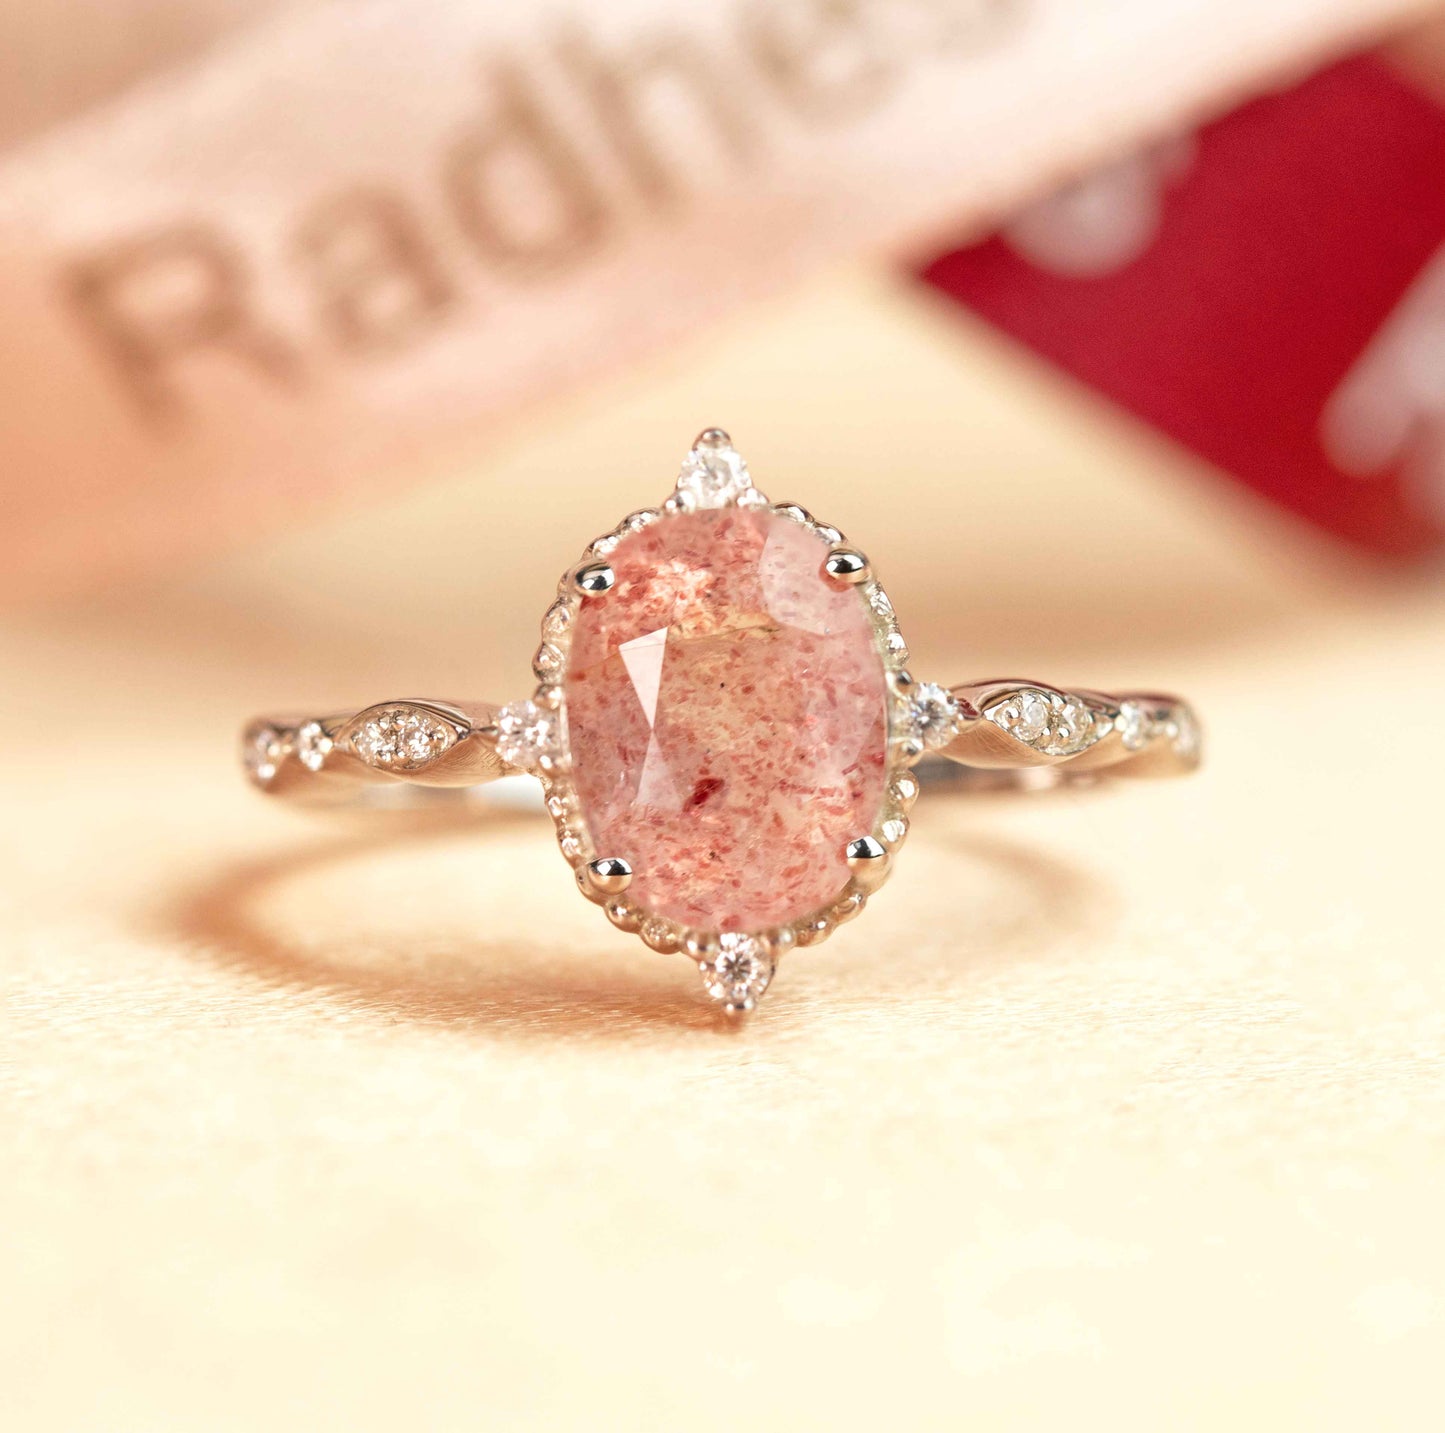 Huge Star 1.1 carat Oval Cut Red Strawberry Quartz and Diamond Marquise and Dot Bezel Ring for Women in White Gold